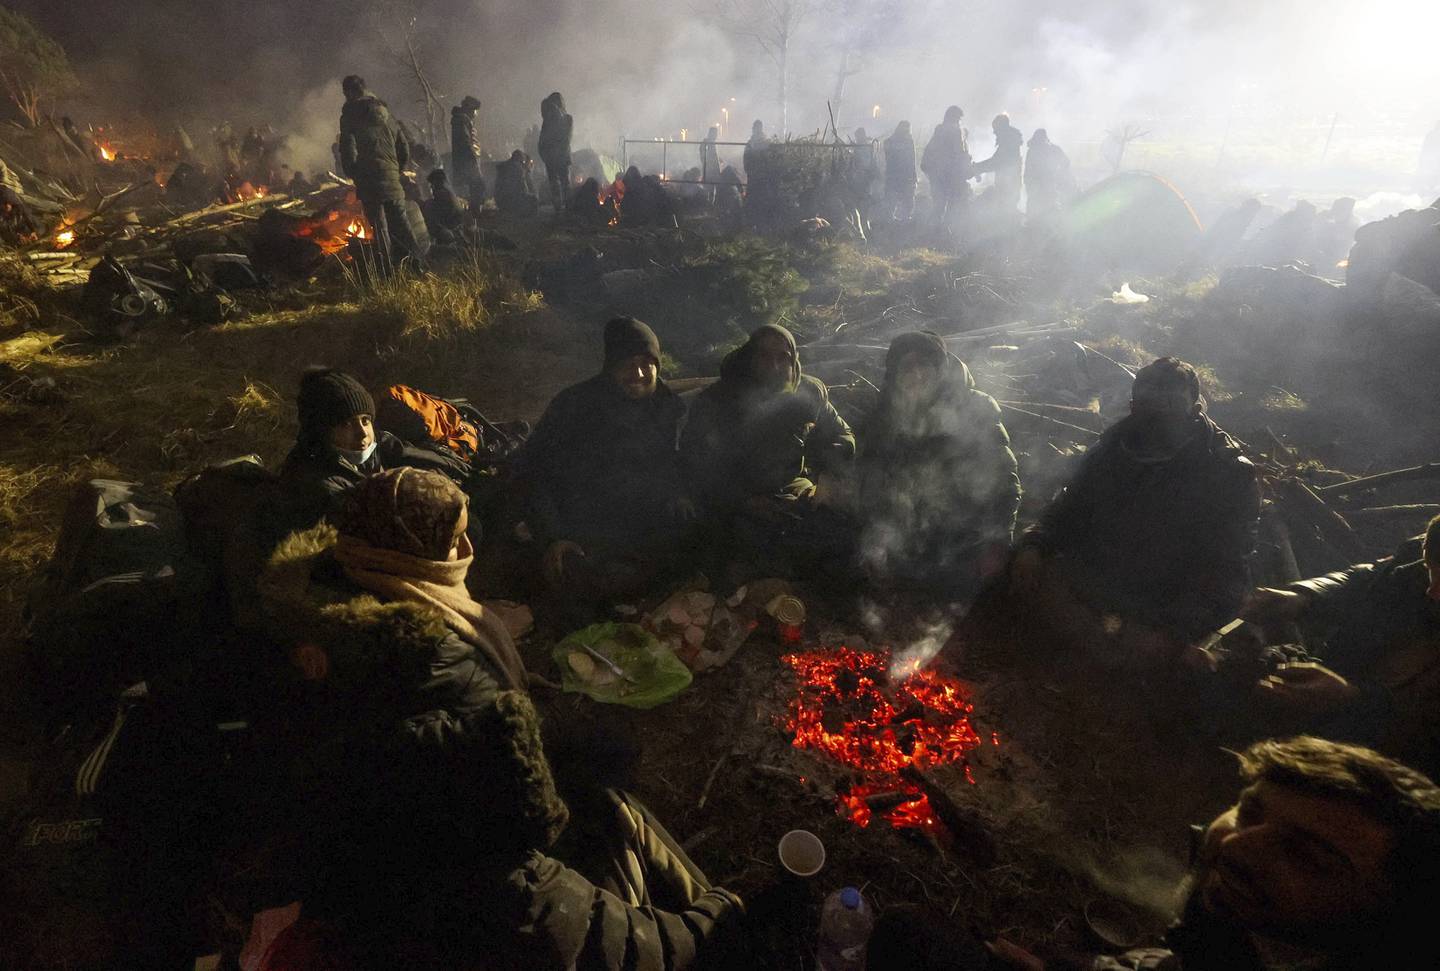 FILE - Migrants warm themselves near a fire at the checkpoint "Kuznitsa" at the Belarus-Poland border near Grodno, Belarus, on Nov. 16, 2021. The U.N. migration agency says the coronavirus pandemic has “radically altered” mobility around the world, projecting in a new report that the growth in the number of international migrants is likely to remain weaker as long as travel and other restrictions remain. (Maxim Guchek/BelTA via AP)